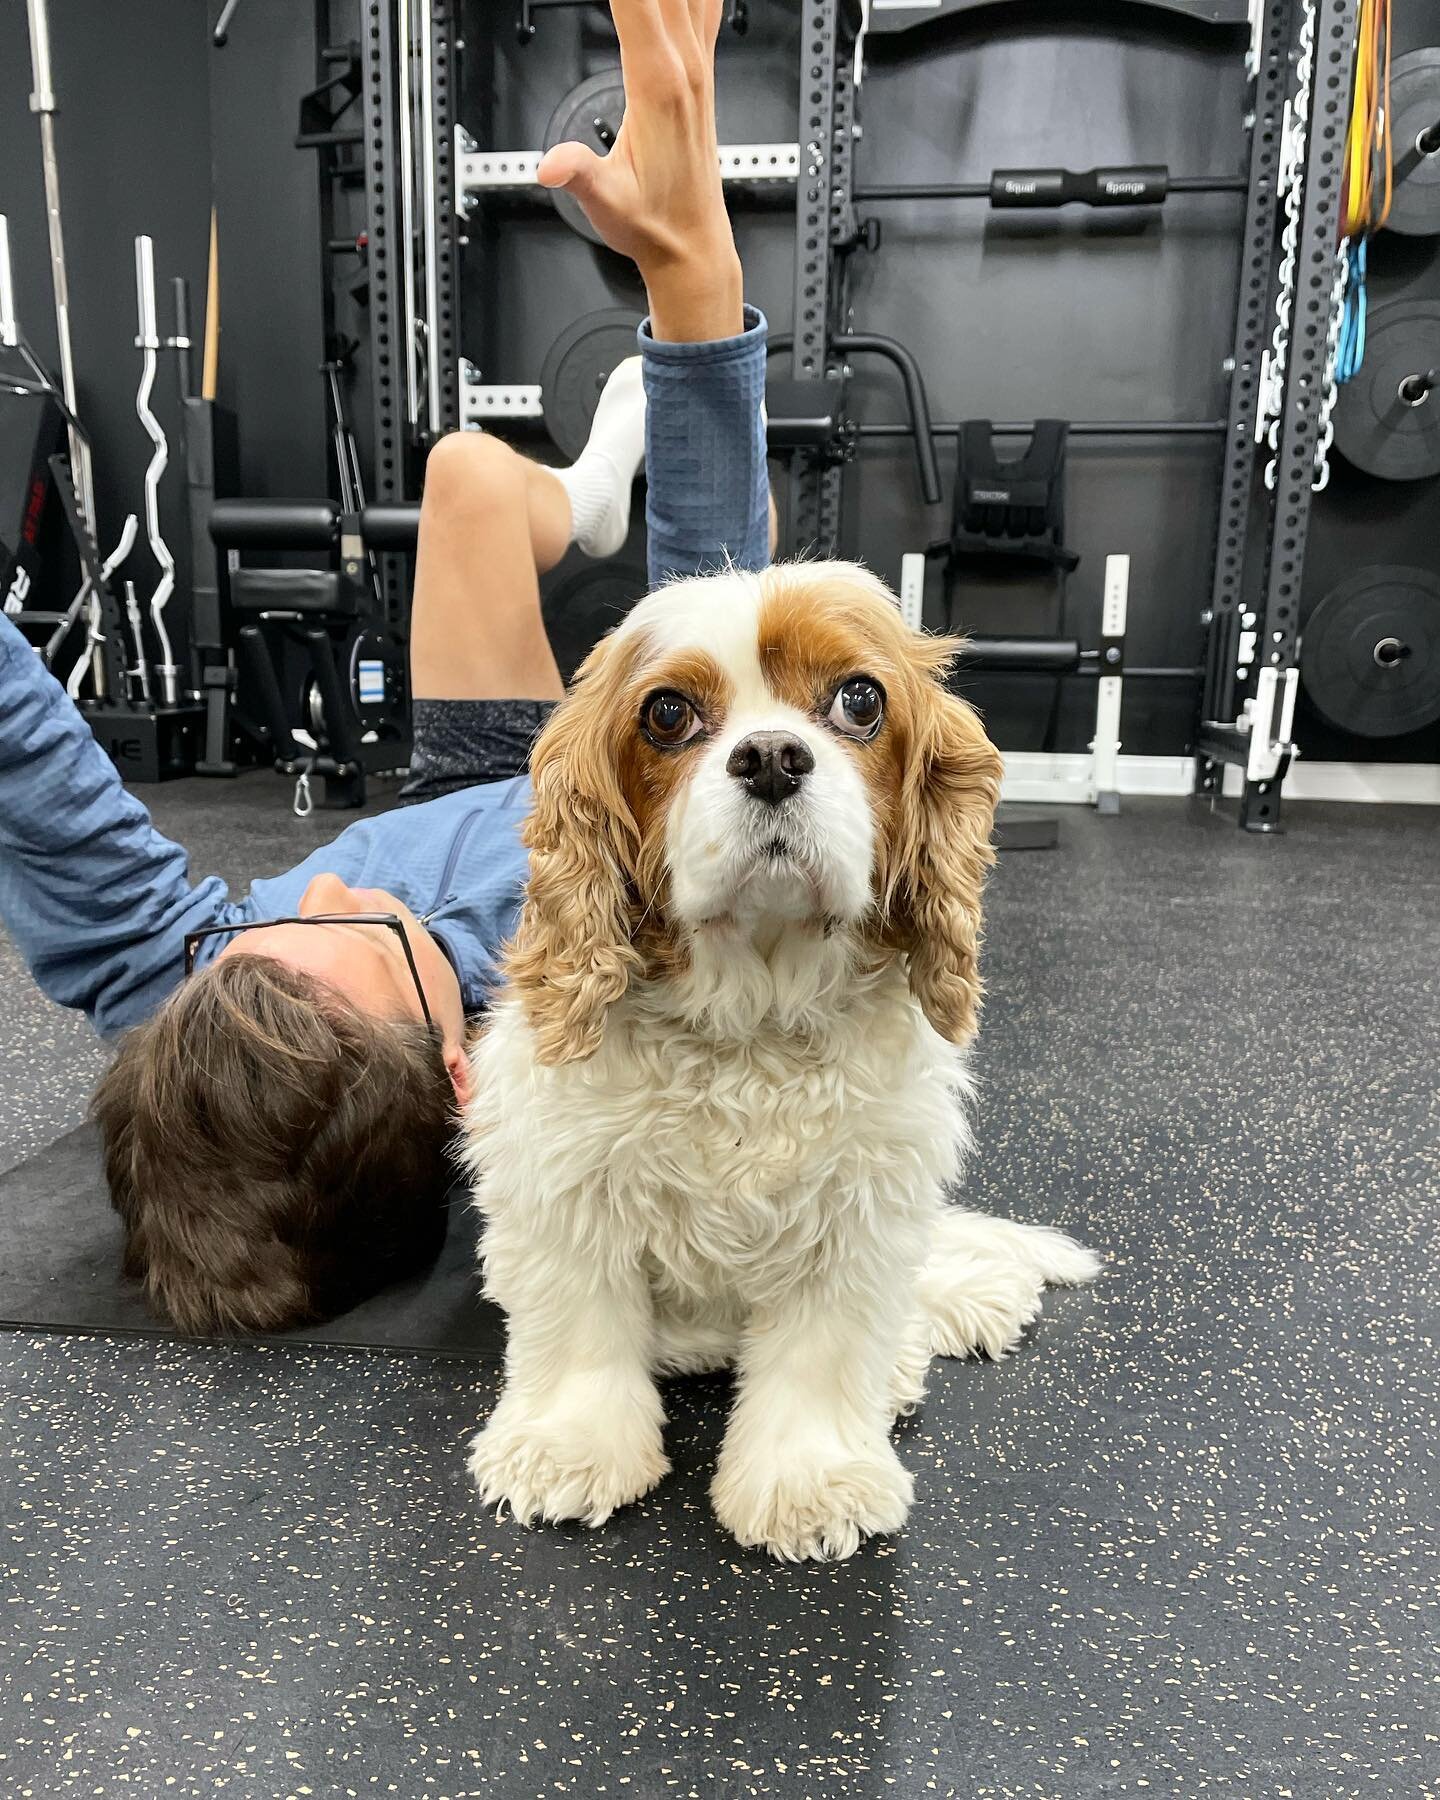 &ldquo;My Dad signed up for 6am workouts, I did not.&rdquo; - Captain Jack, probably
#pupsofthespace